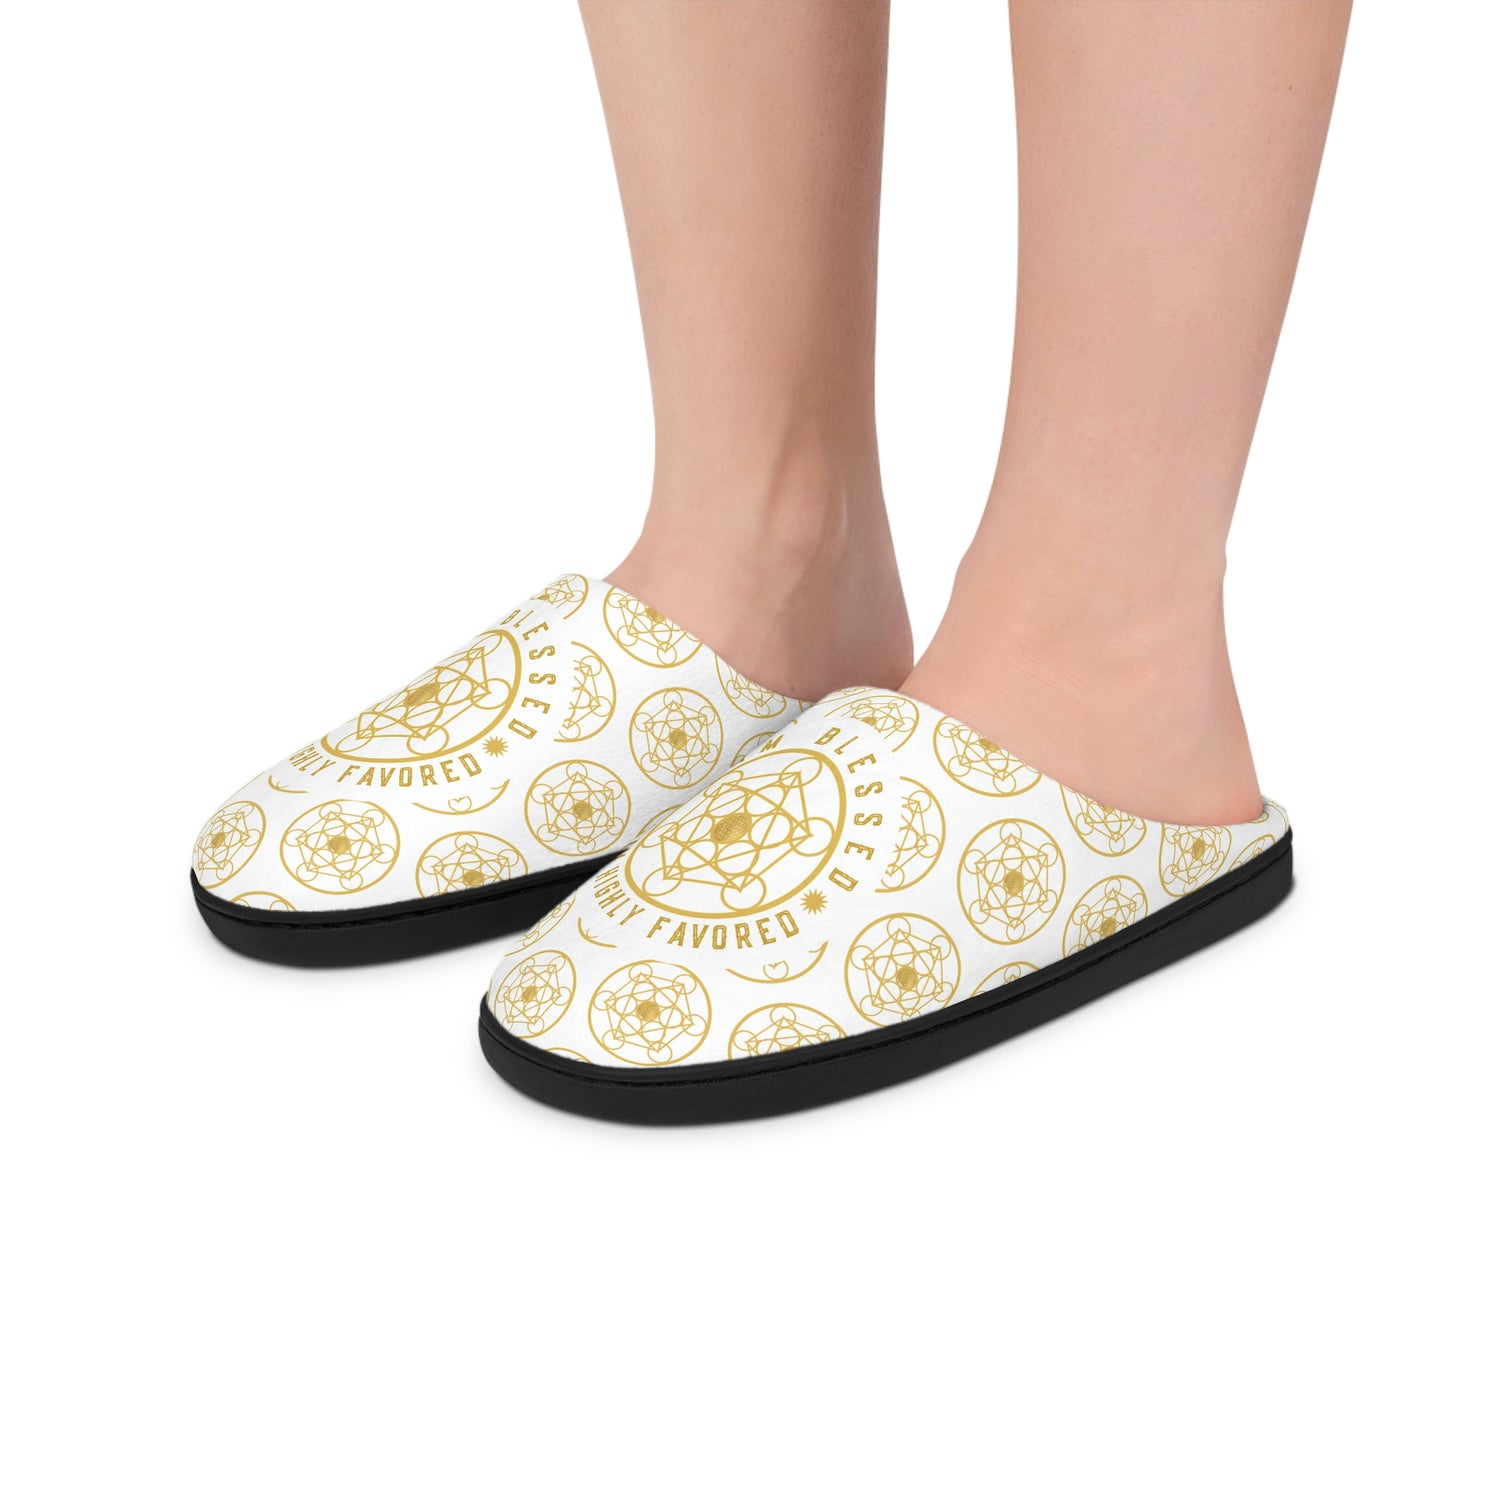 I AM BLESSED I AM HIGHLY FAVORED - Men's Indoor Slippers - White